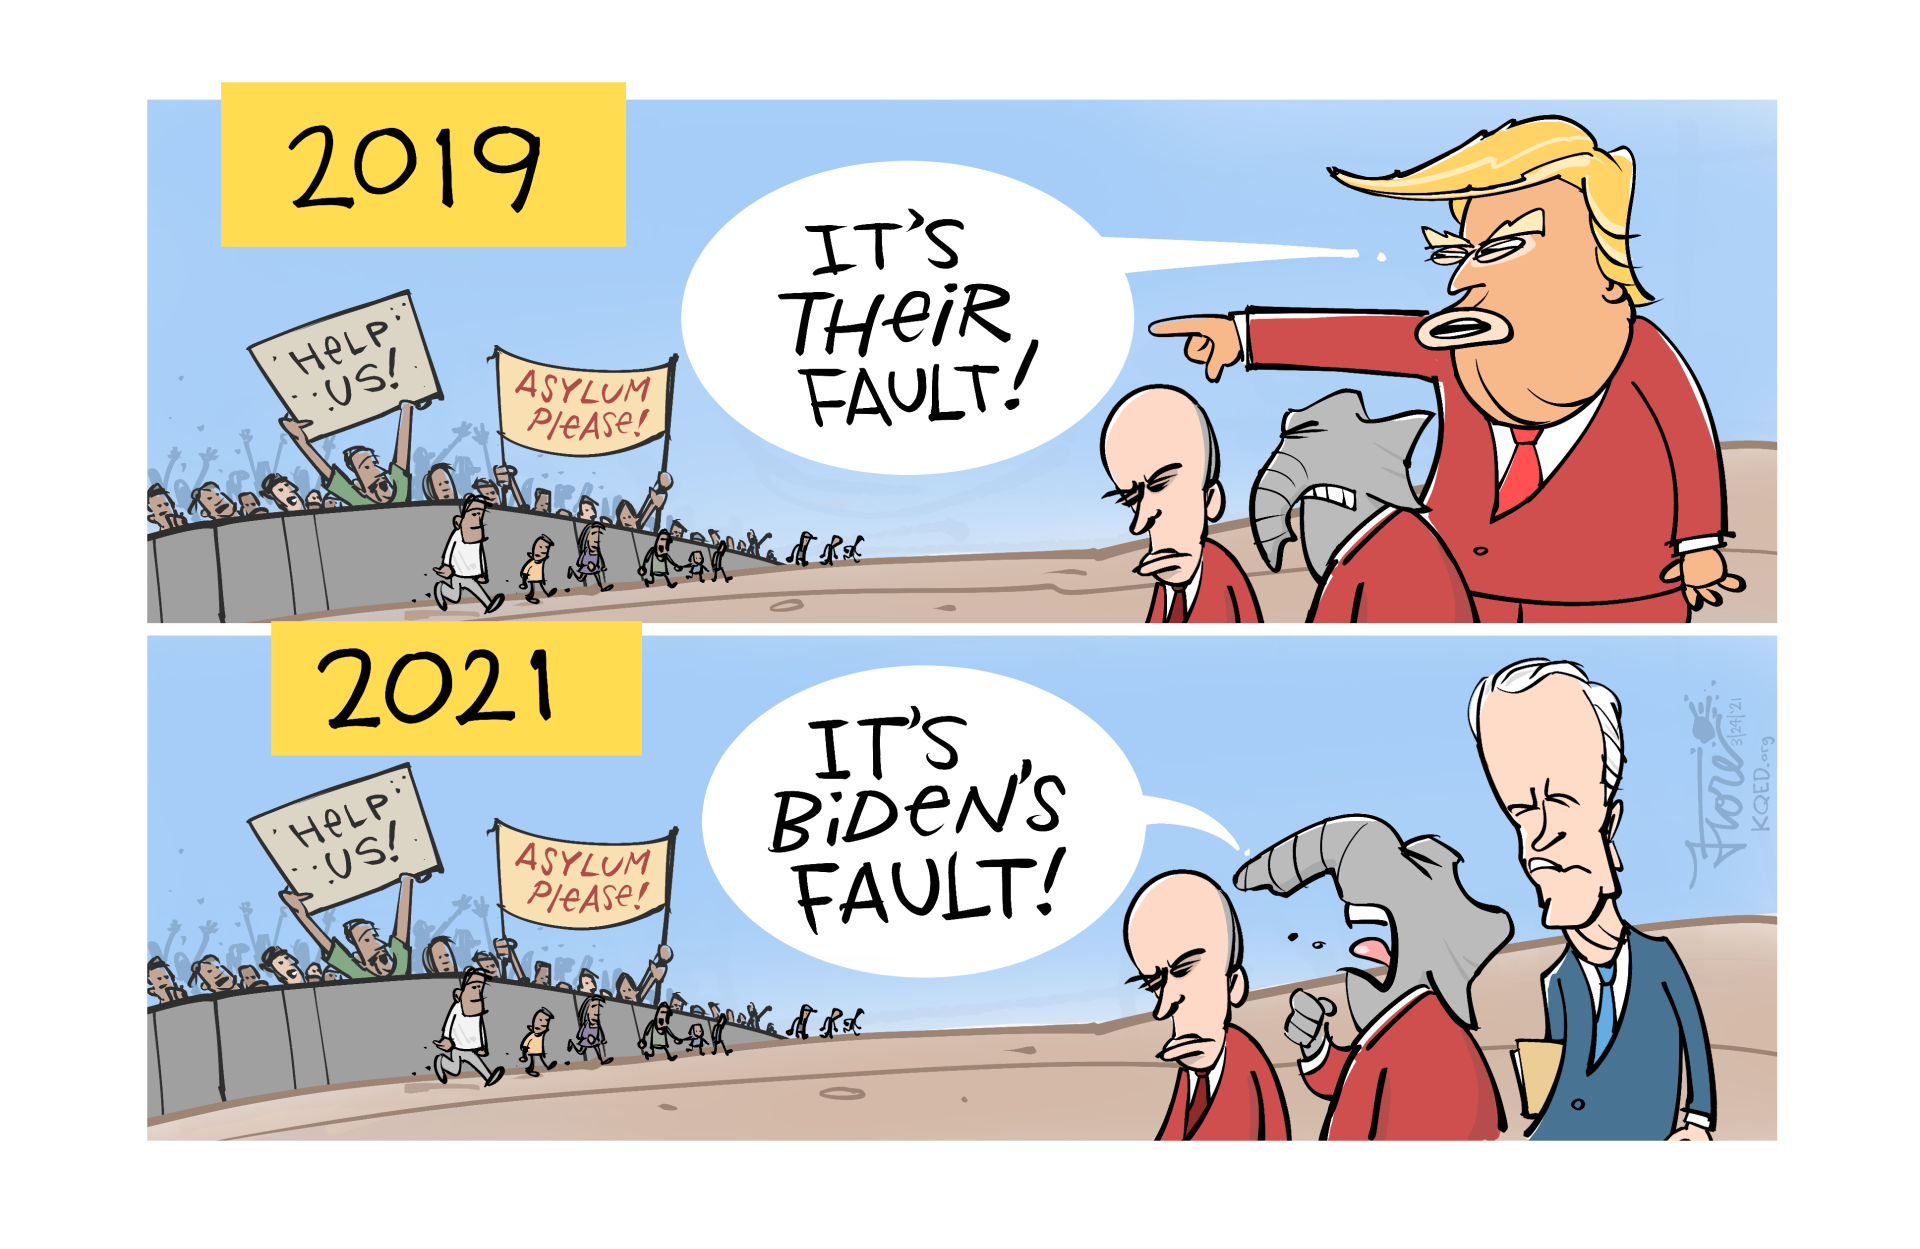 A Mark Fiore cartoon comparing the border "surge" of 2019 to the large numbers of migrants at the border in 2021. In 2019, the Trump character says "it's their fault" while pointing at the migrants, in 2021, Republicans say "it's Biden's fault."